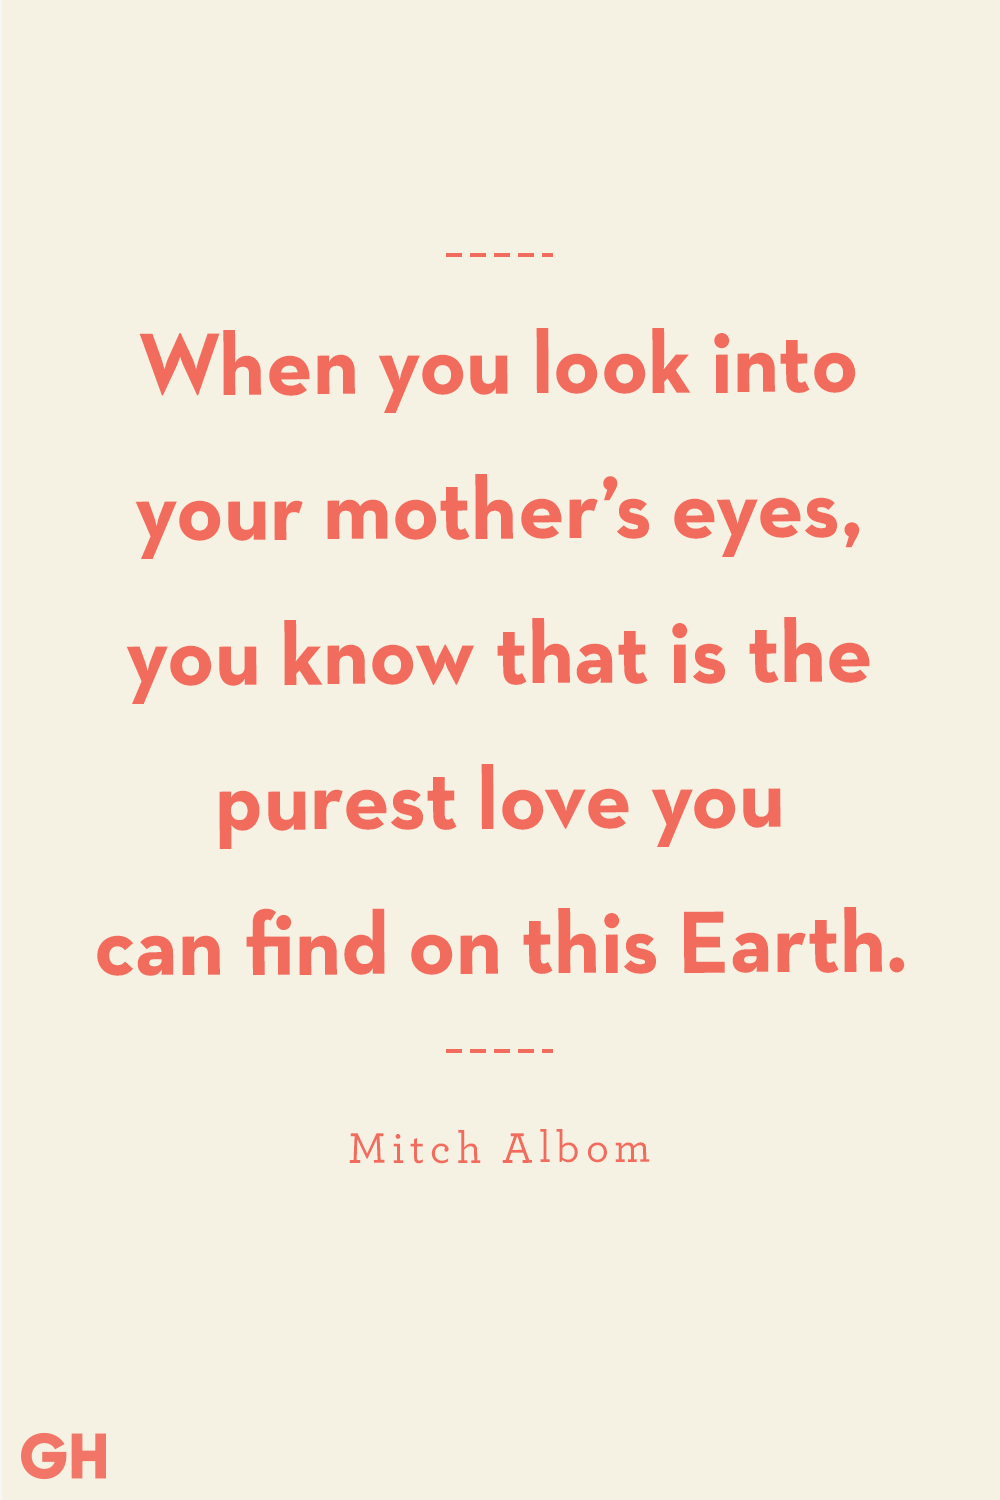 mother and son relationship quotes